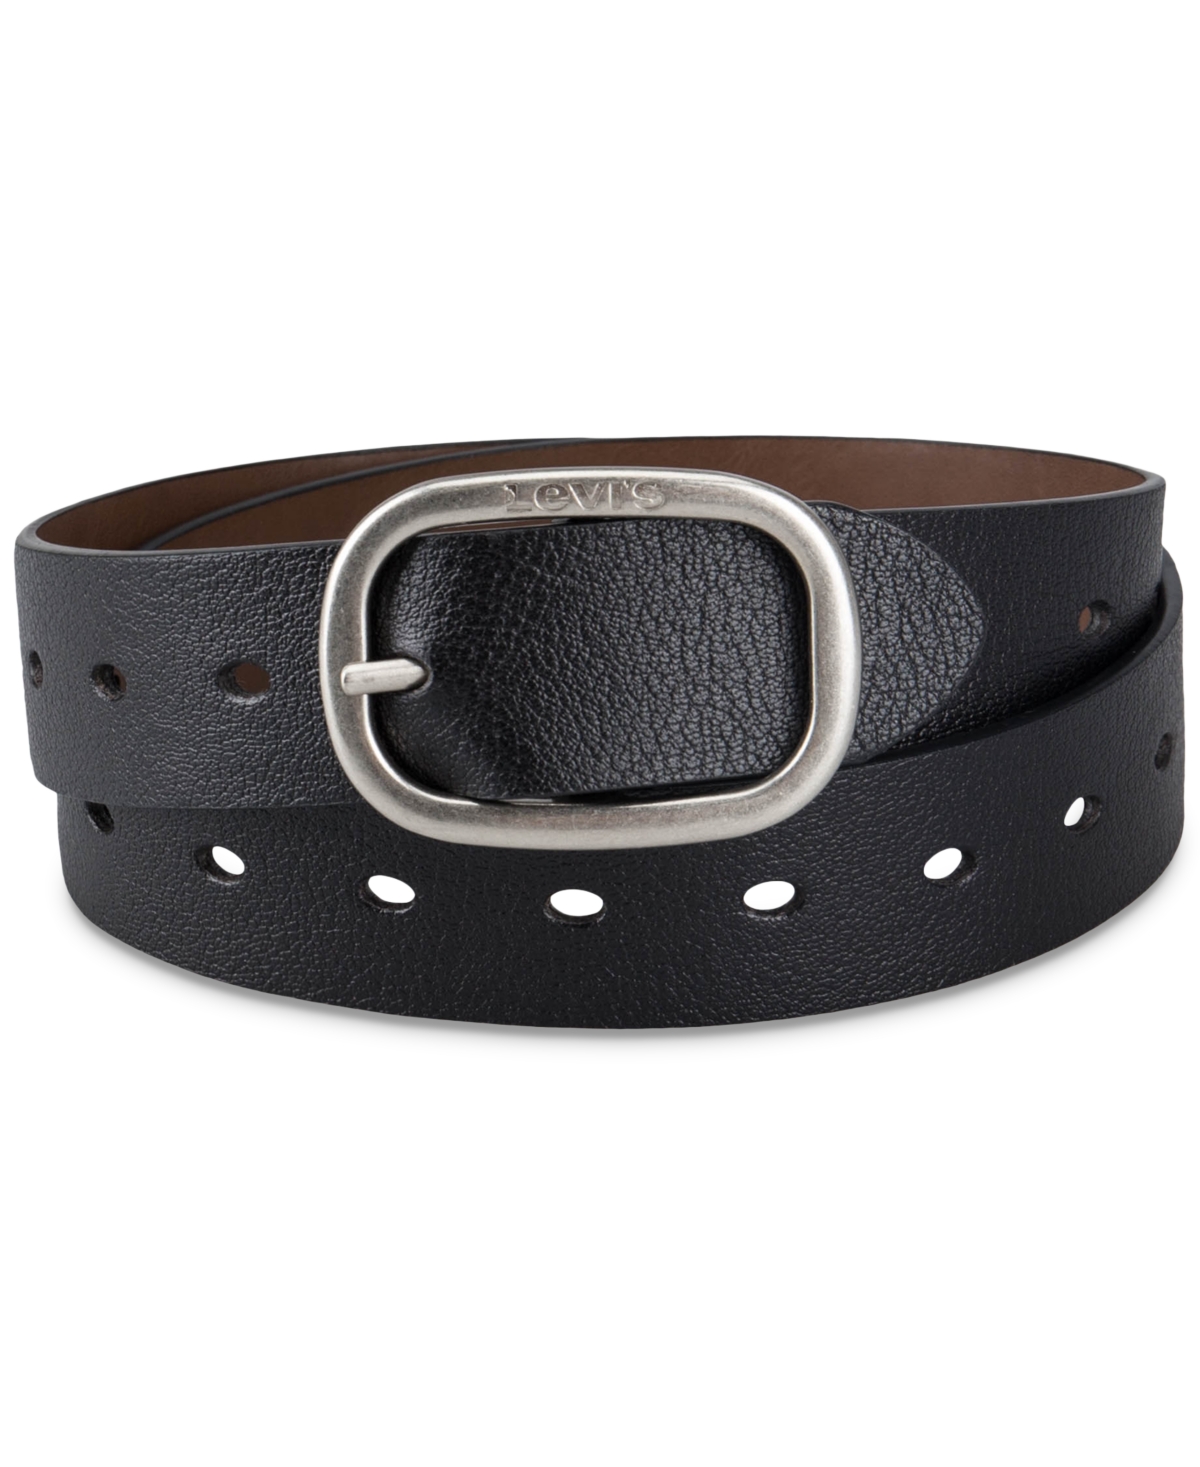 Levi's Women's Reversible Perforated Leather Belt In Black,brown